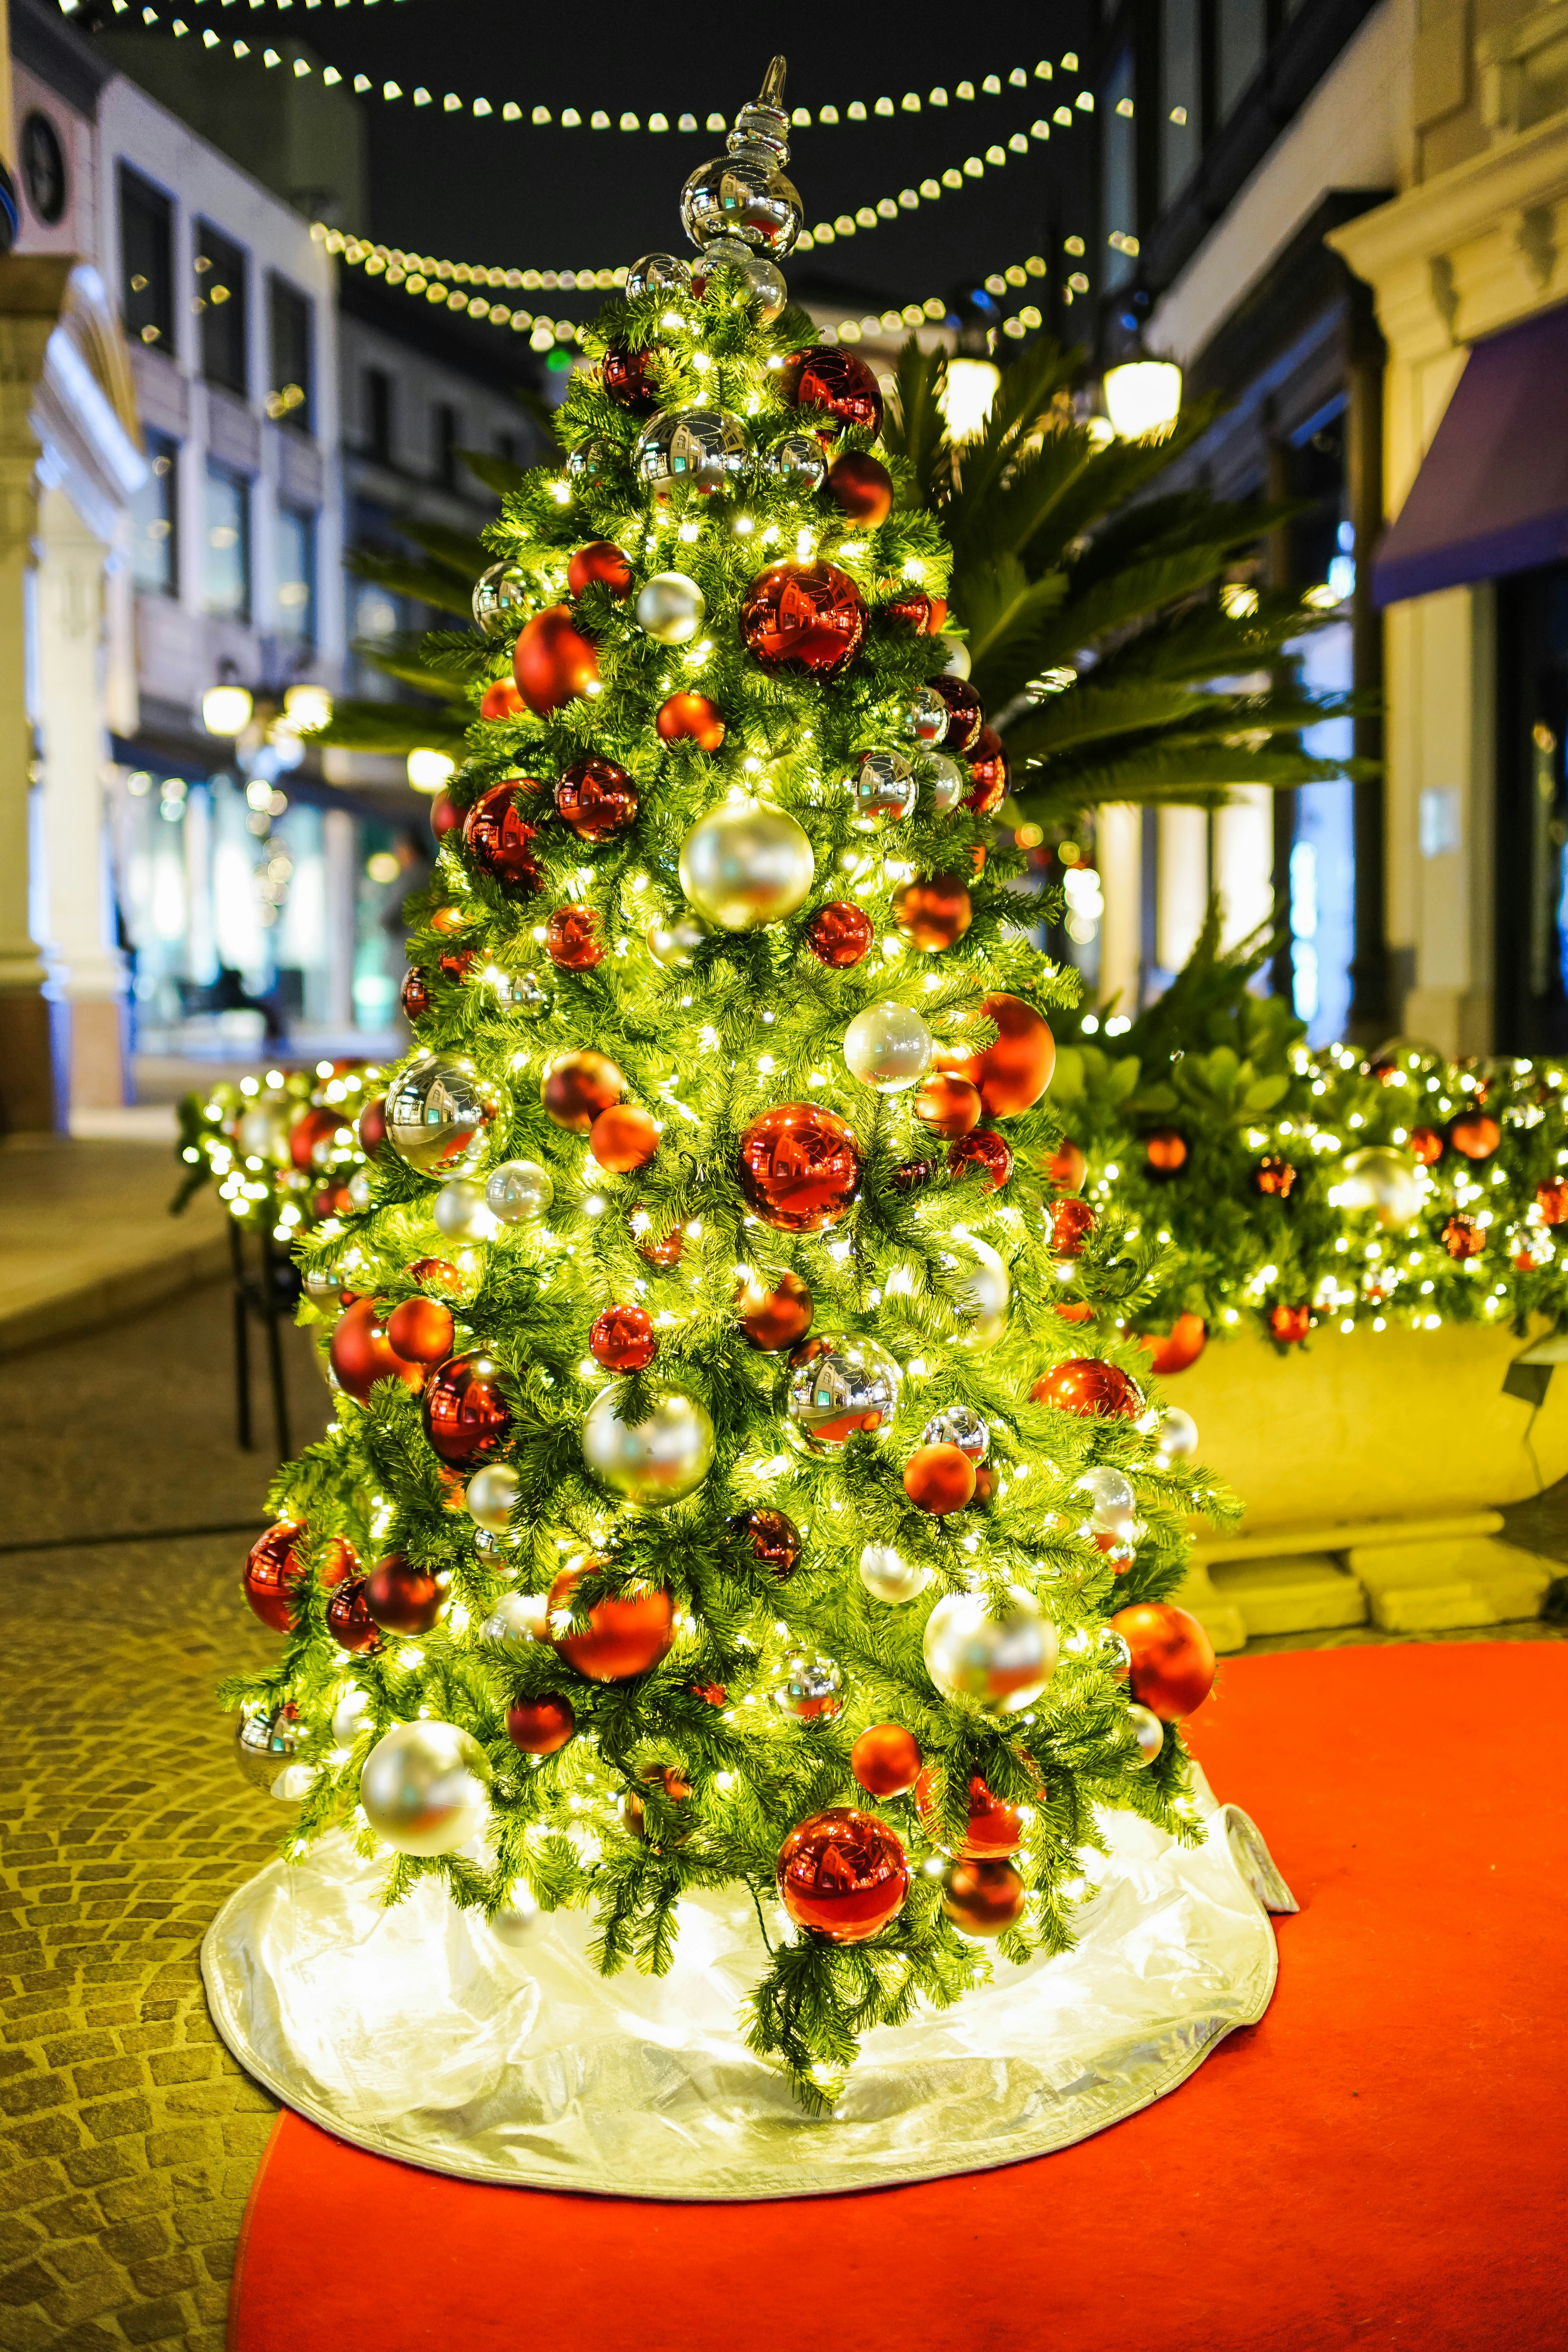 Christmas Tree Pictures Hq Download Free Images On Unsplash Images, Photos, Reviews